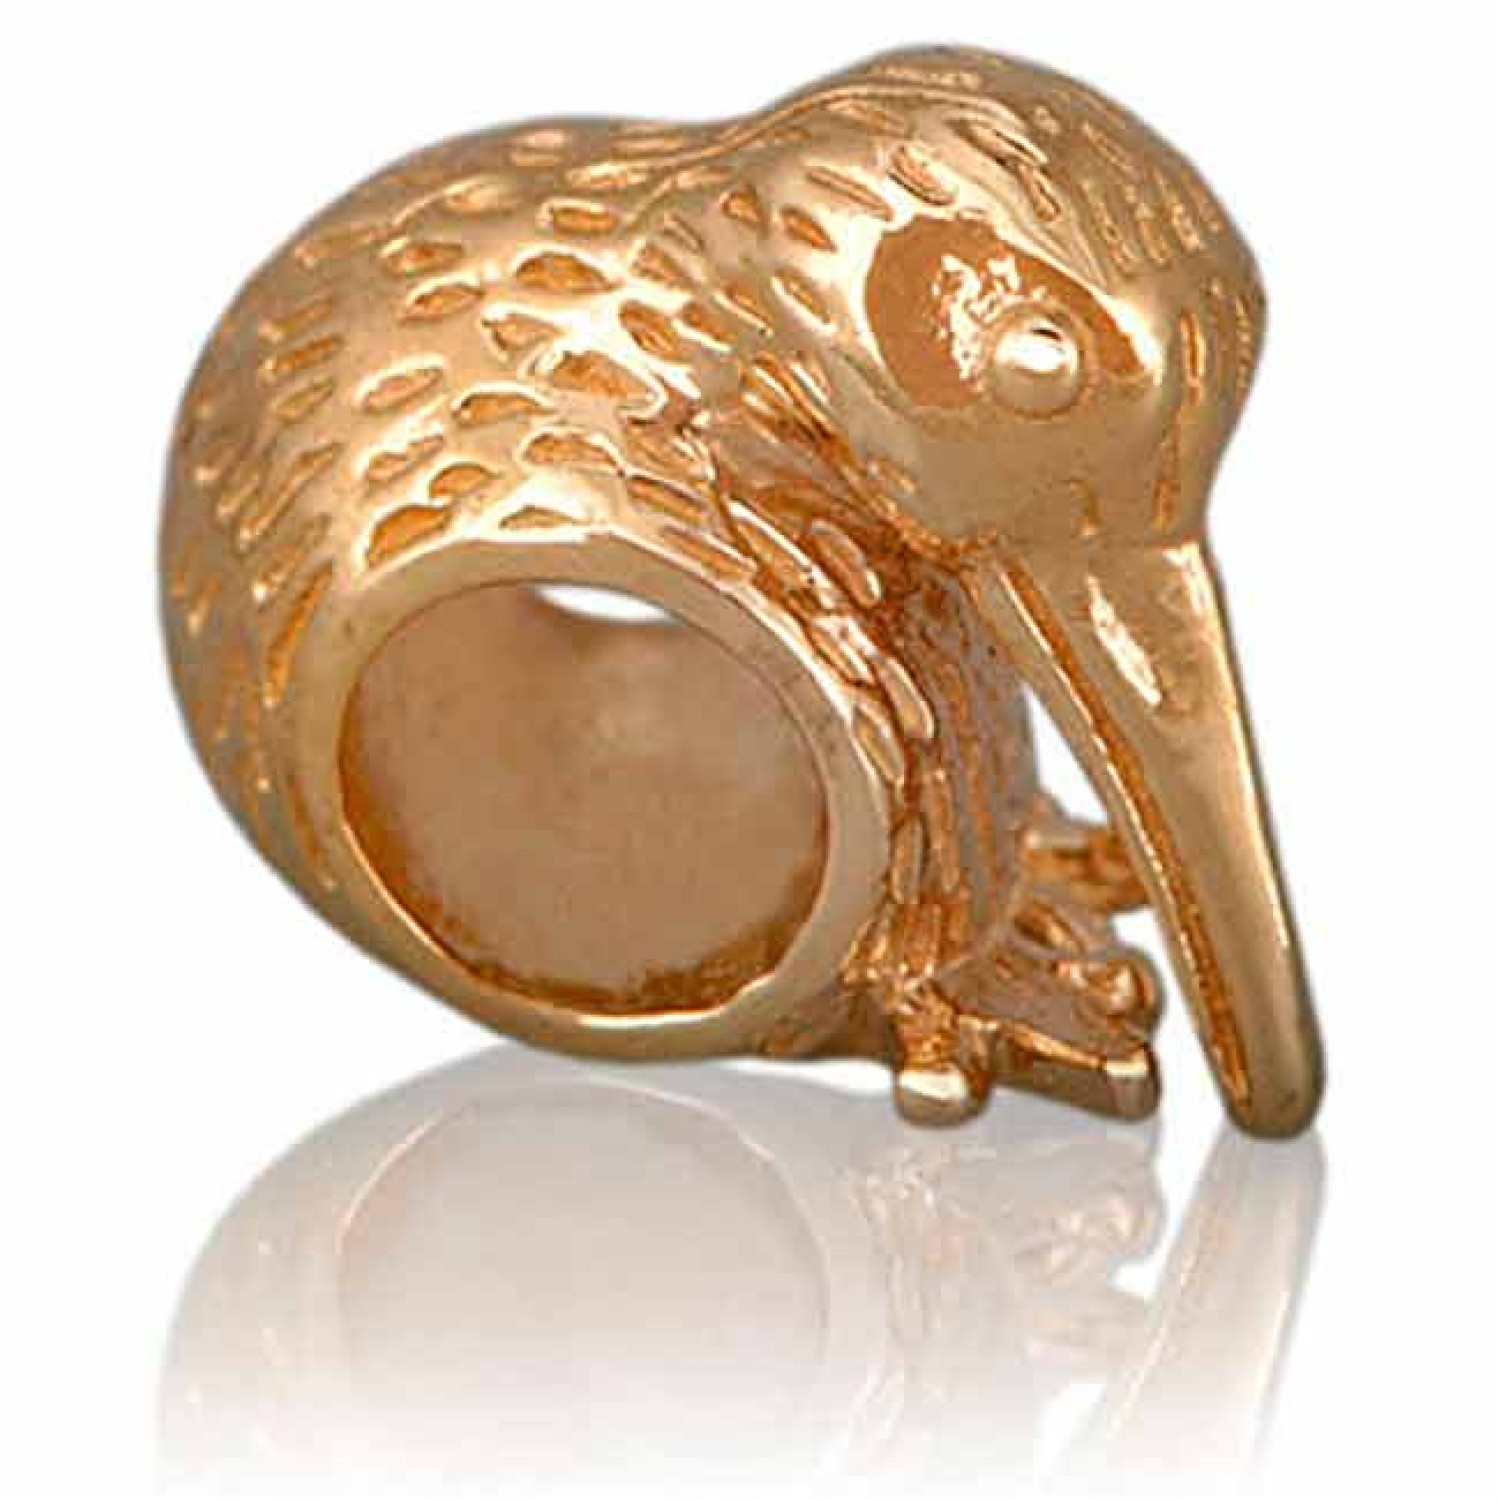 103G Evolve Charm Baby Kiwi. Evolve New Zealand Inspired 9ct Baby Kiwi Charm  This Evolve Charm represents the flightless kiwi an endangered New Zealand bird and the colloquial name fondly given to all New Zealanders.  To be born in New Ze @christies.onli